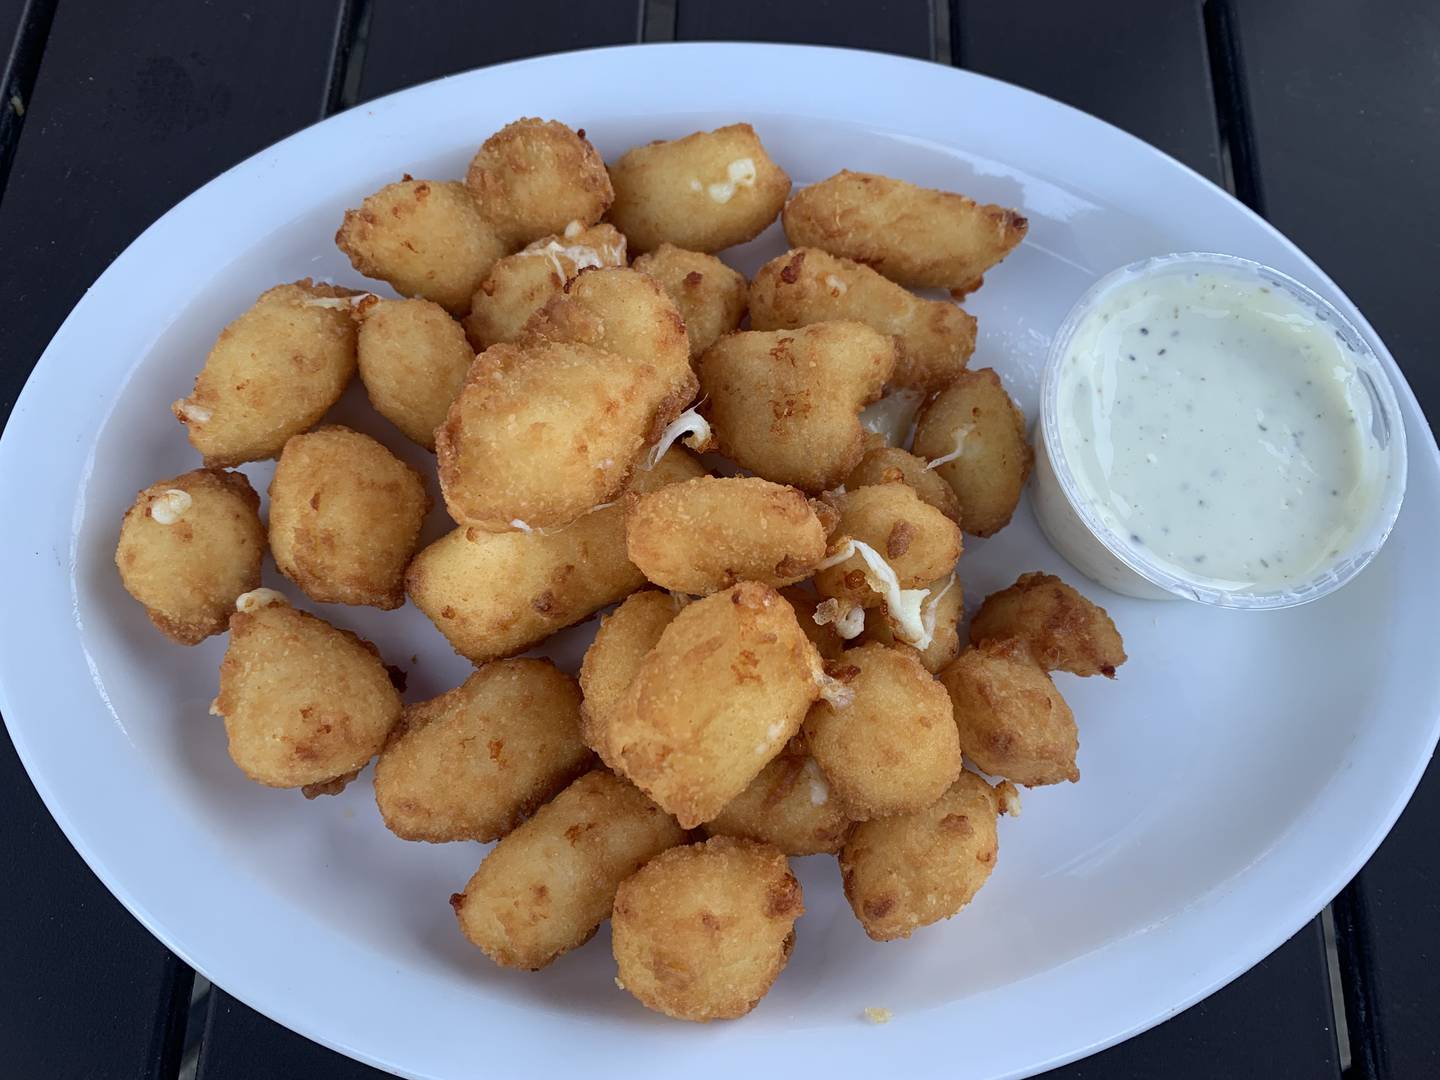 The Wisconsin Cheese Curds at the Rusty Nail Saloon in Ringwood come with homemade ranch dressing. The thin and crisp batter covers flavorful cheese.